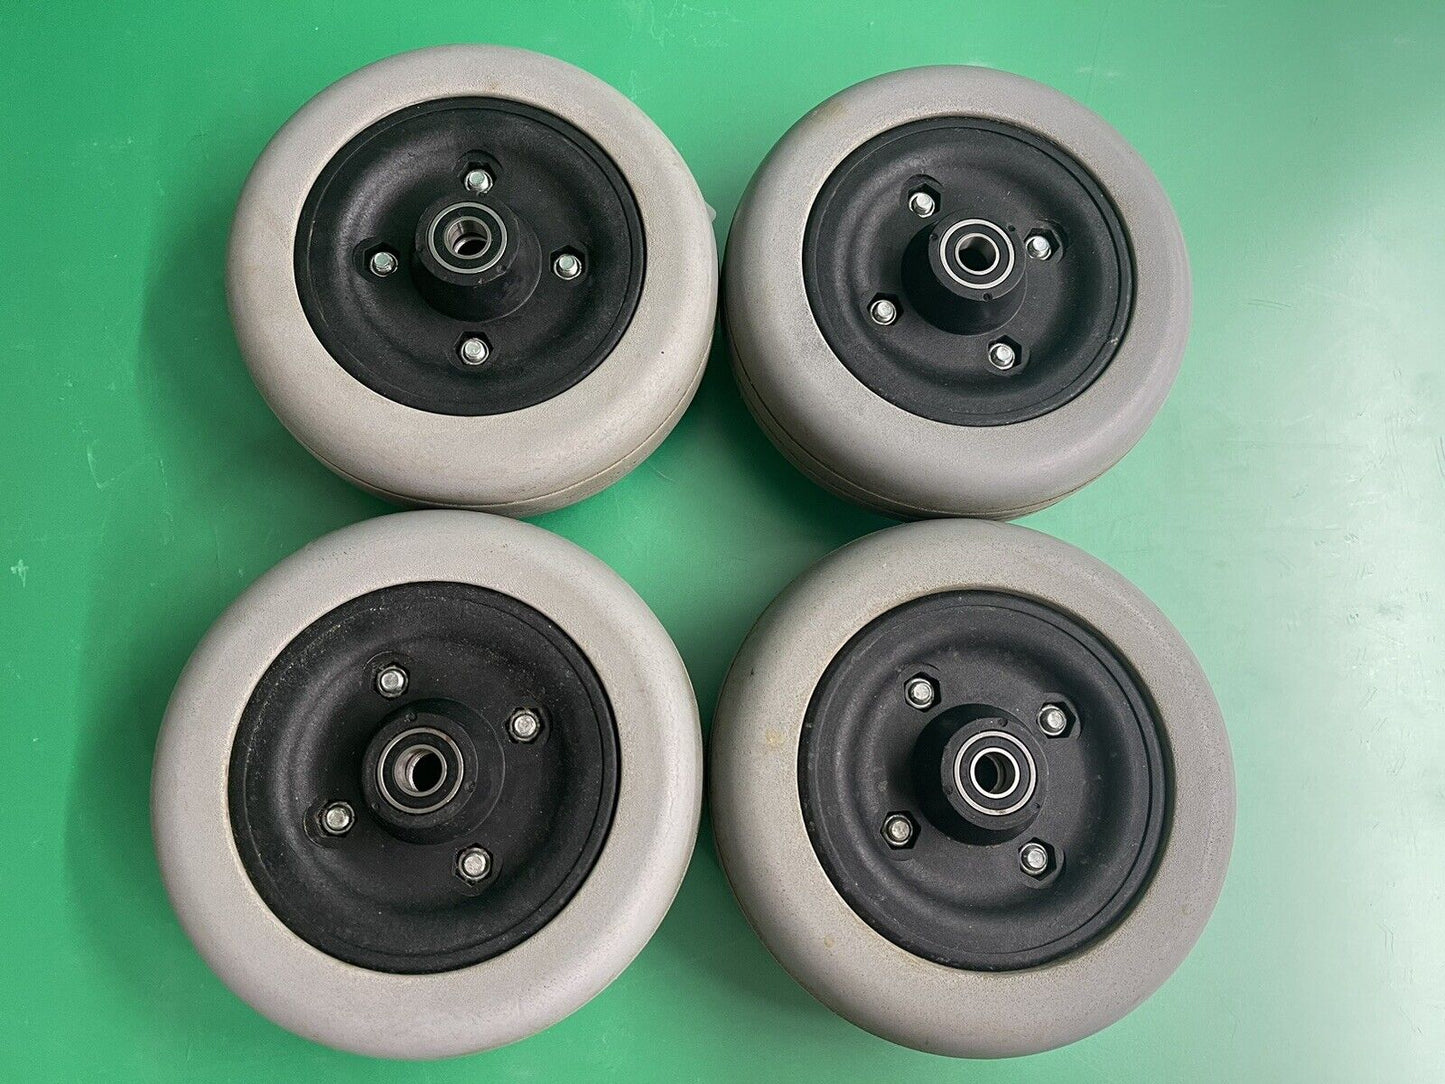 Invacare Caster Wheels for Pronto Sure Step & TDX Wheelchairs -set of 4- #i110